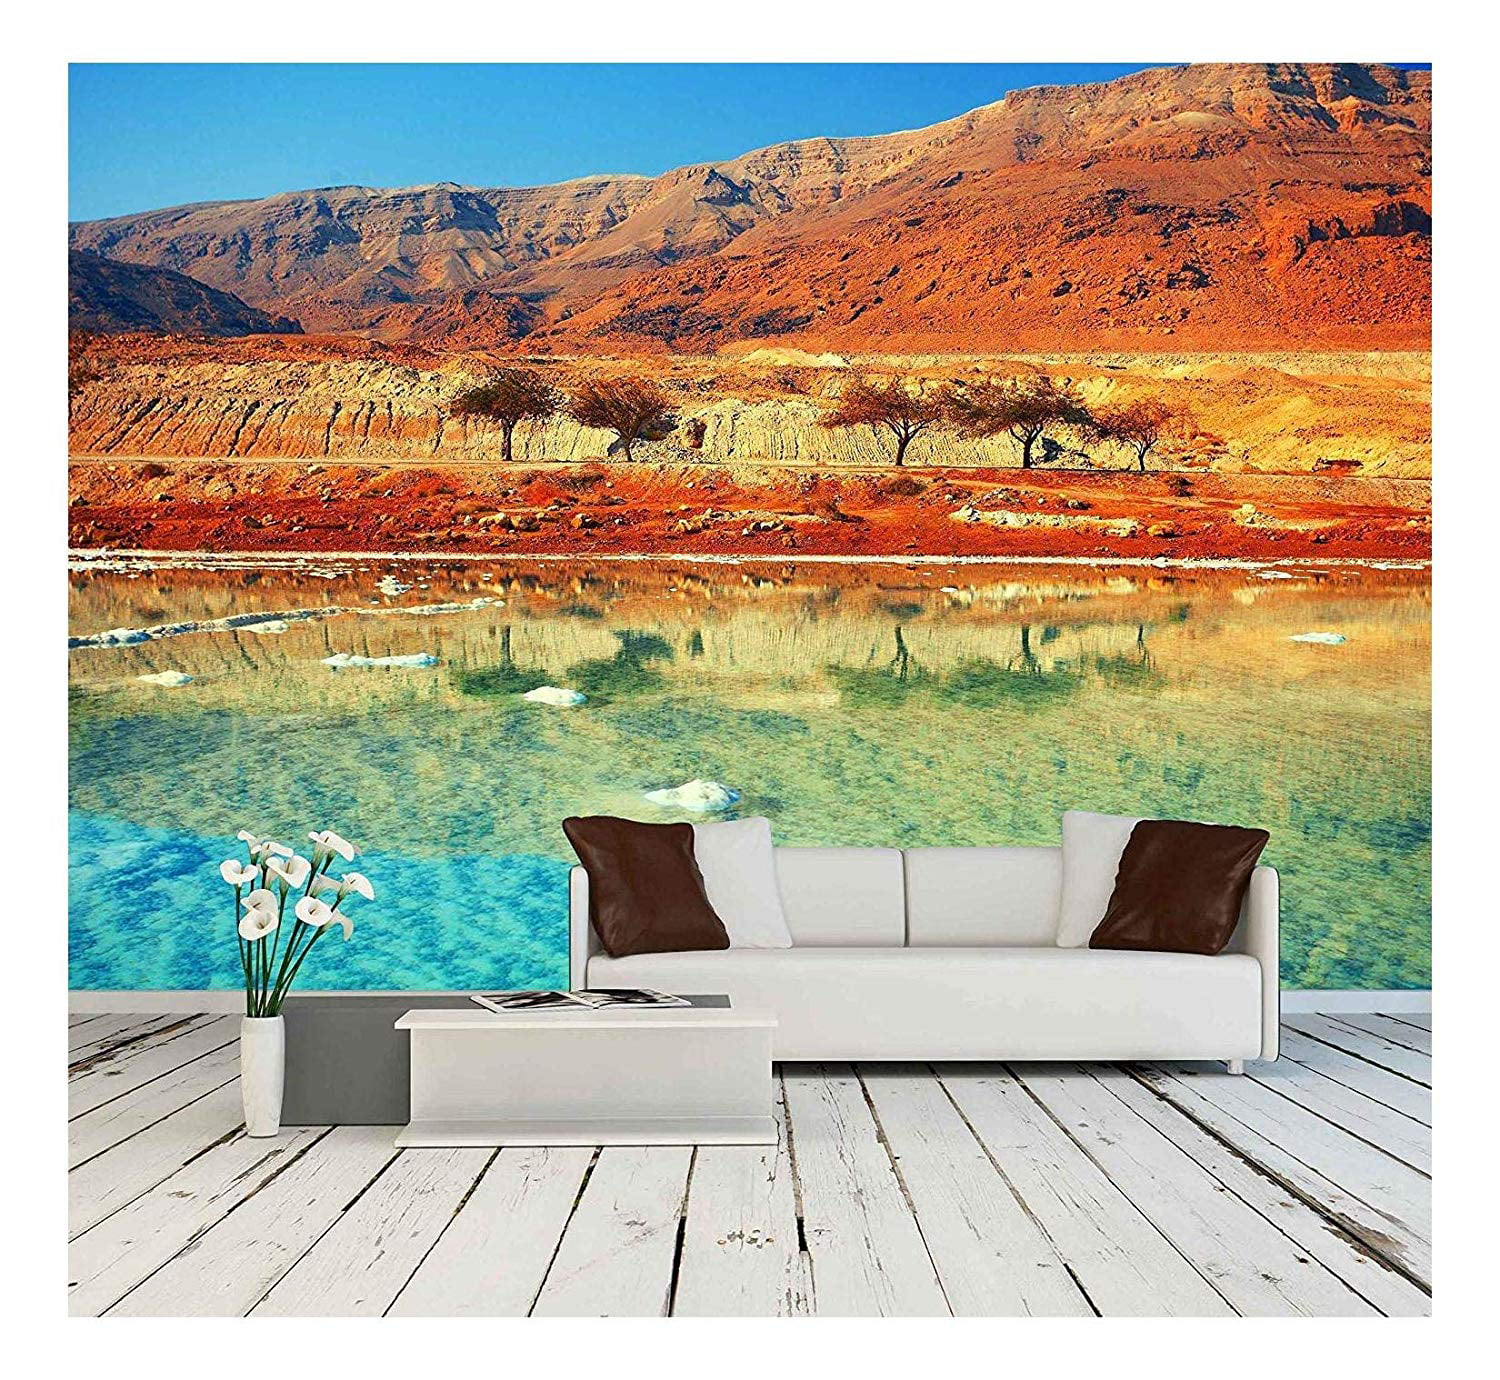 wall26 Removable Wall Mural Dead Sea Self-adhesive Large Wallpaper